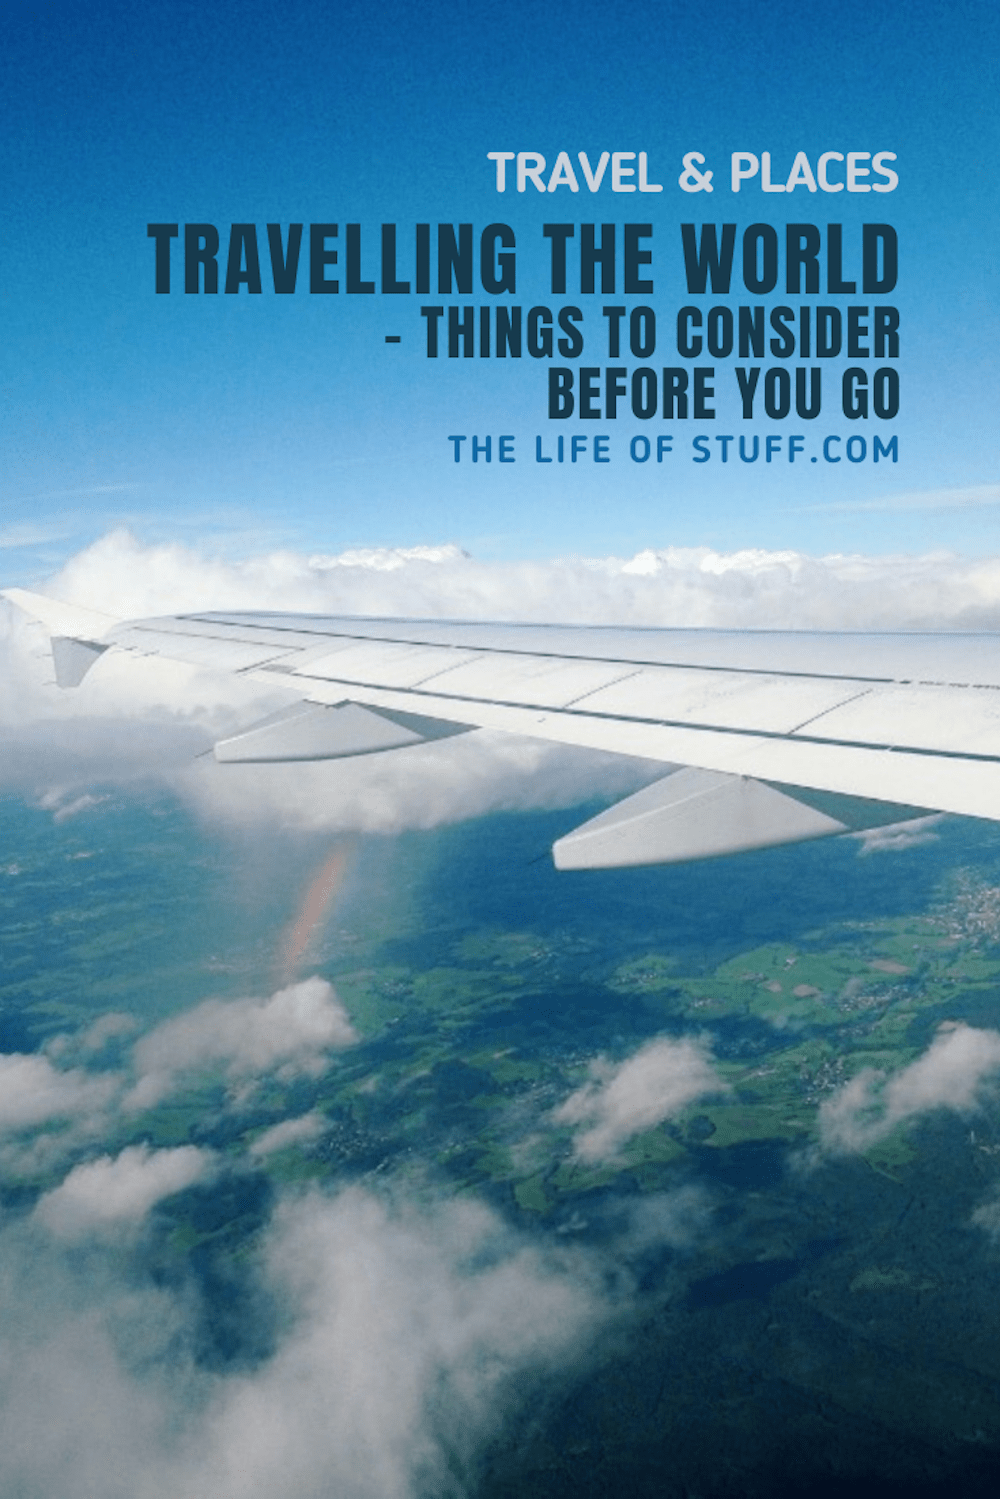 Travelling The World - Things To Consider Before You Go - The LIfe of Stuff